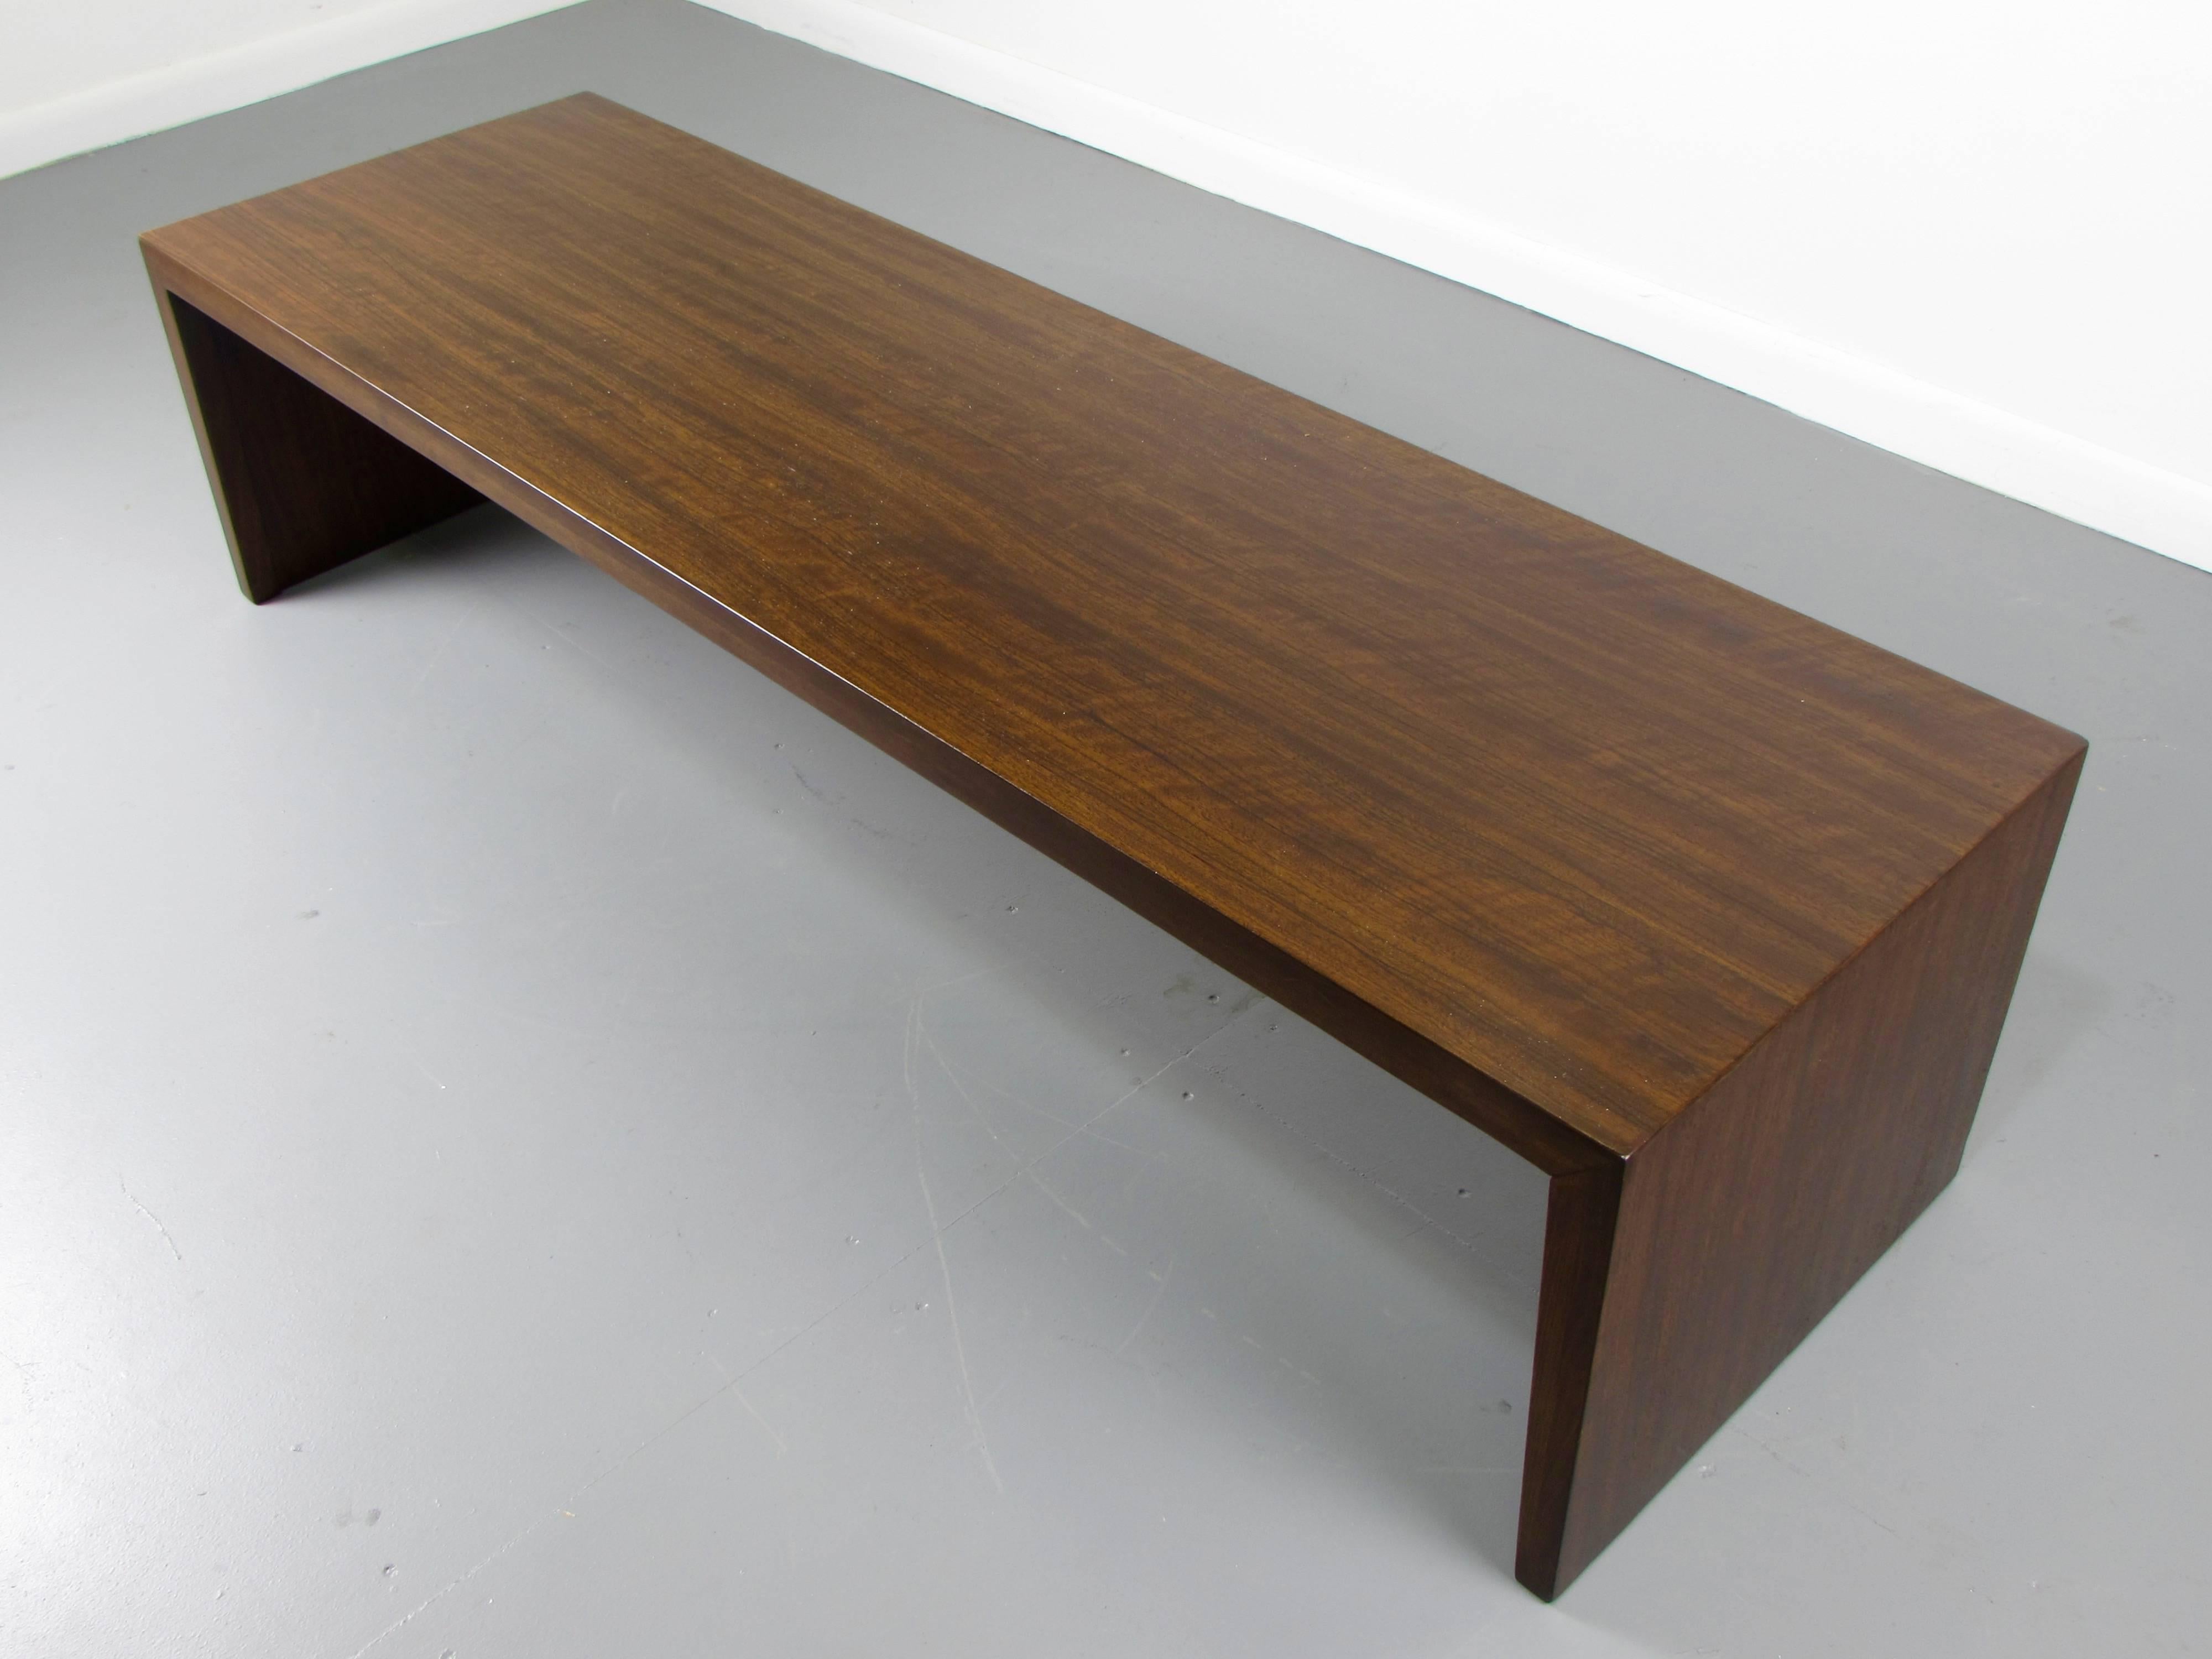 Mid-Century Modern Handsome Mahogany Bench or Coffee Table by Milo Baughman for Drexel, 1950s